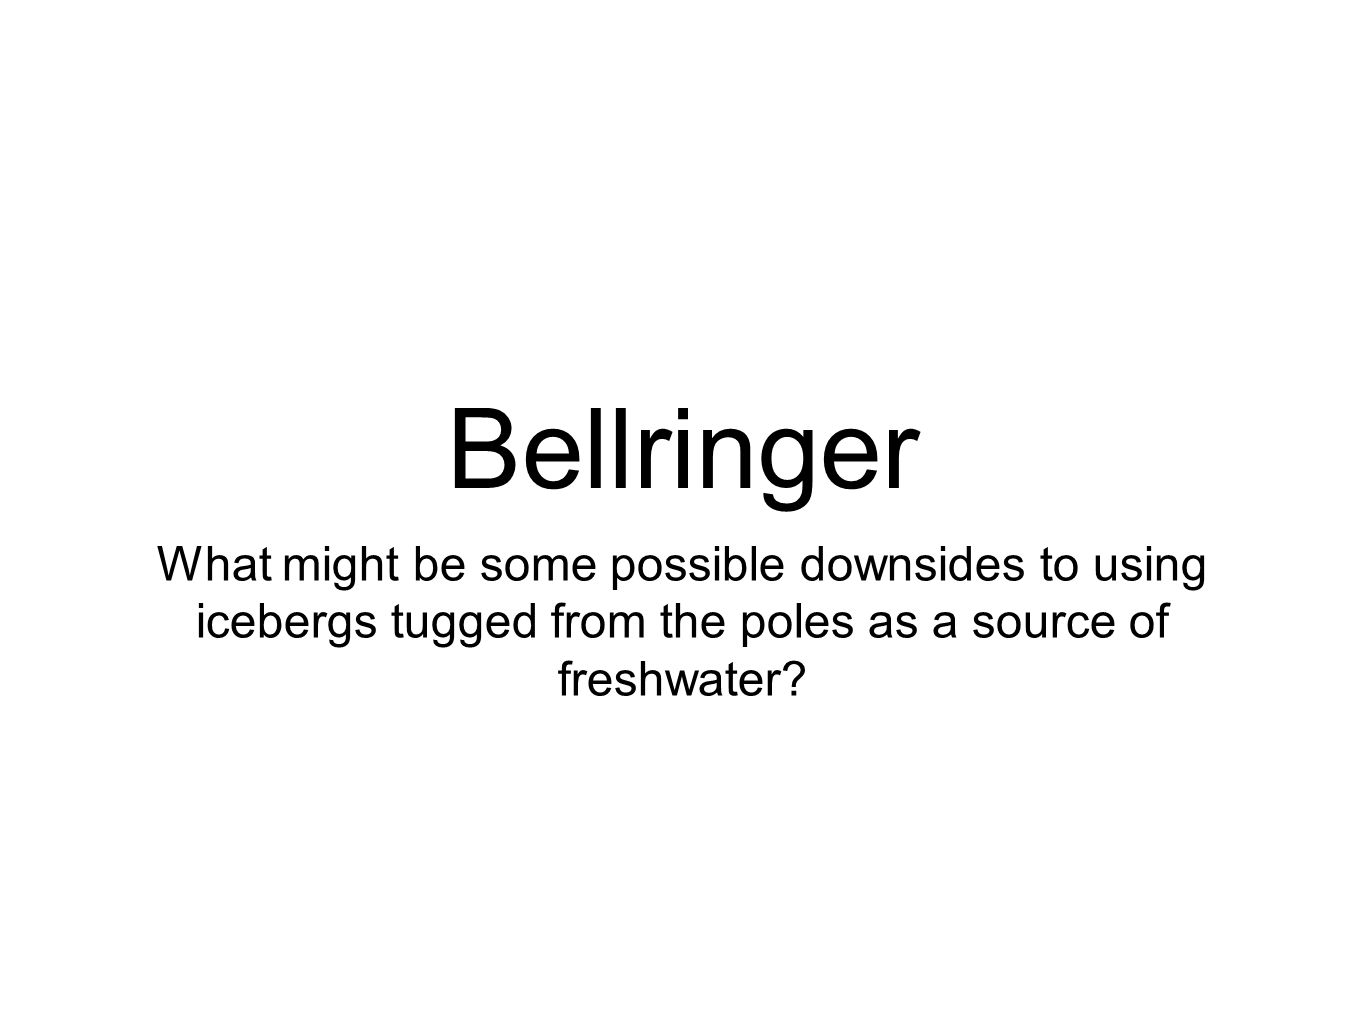 Bellringer What might be some possible downsides to using icebergs tugged from the poles as a source of freshwater